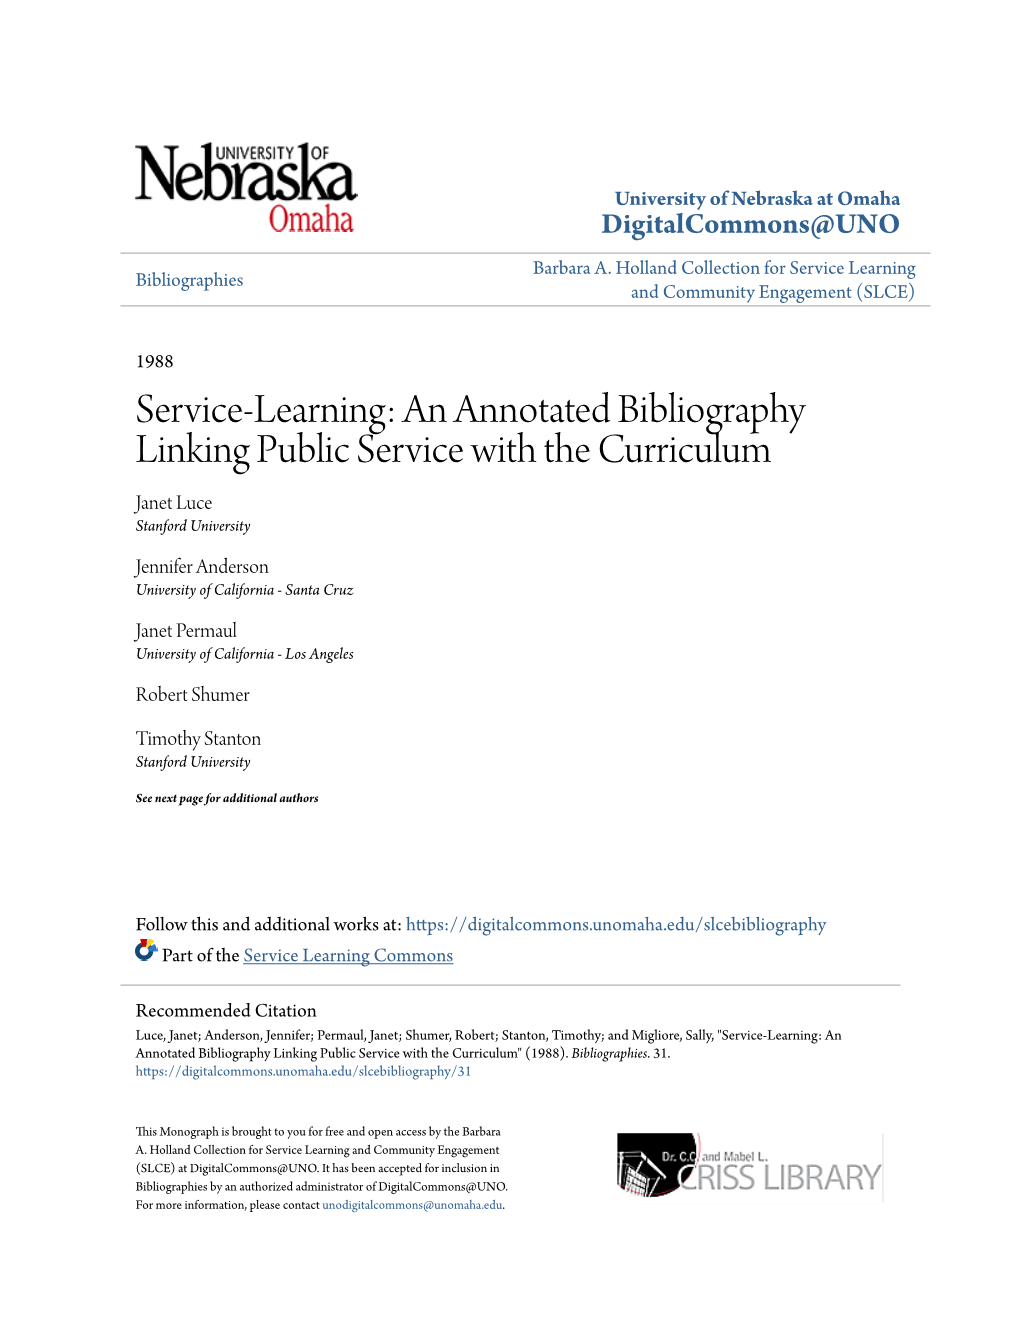 An Annotated Bibliography Linking Public Service with the Curriculum Janet Luce Stanford University